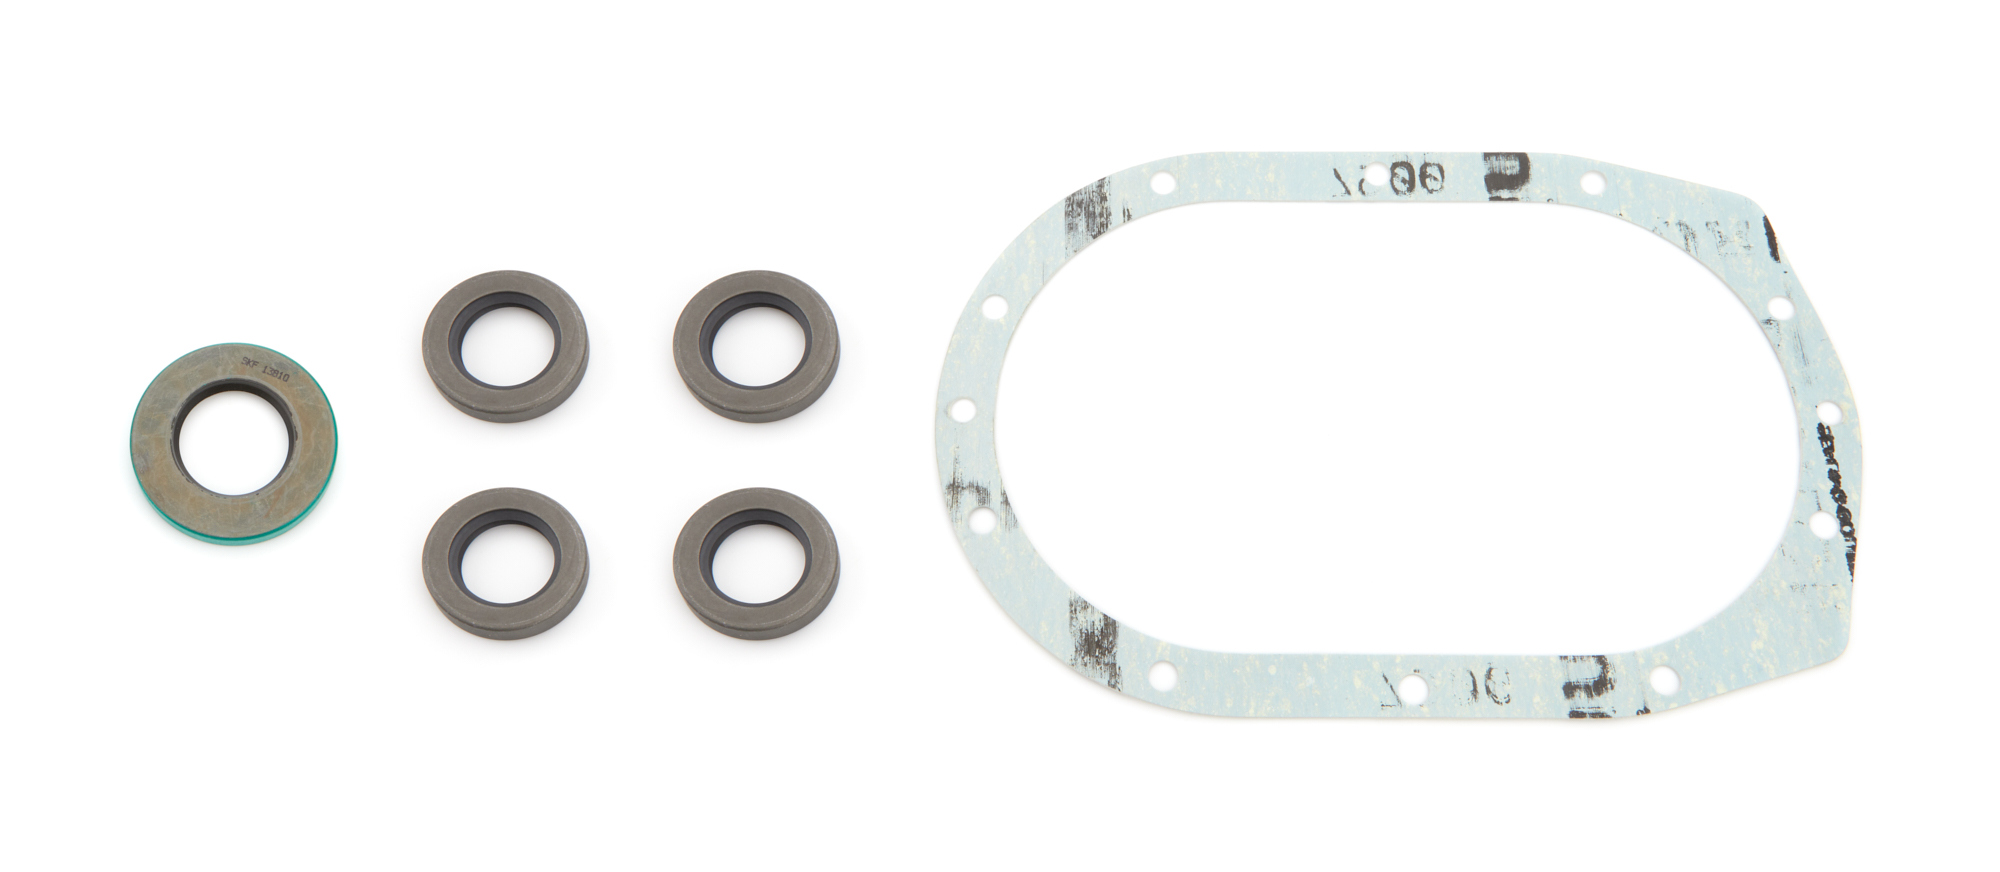 Weiand 9588 - Supercharger Gasket, Gasket / Seal, Hardware Included, Composite, 6-71 Superchargers, Kit